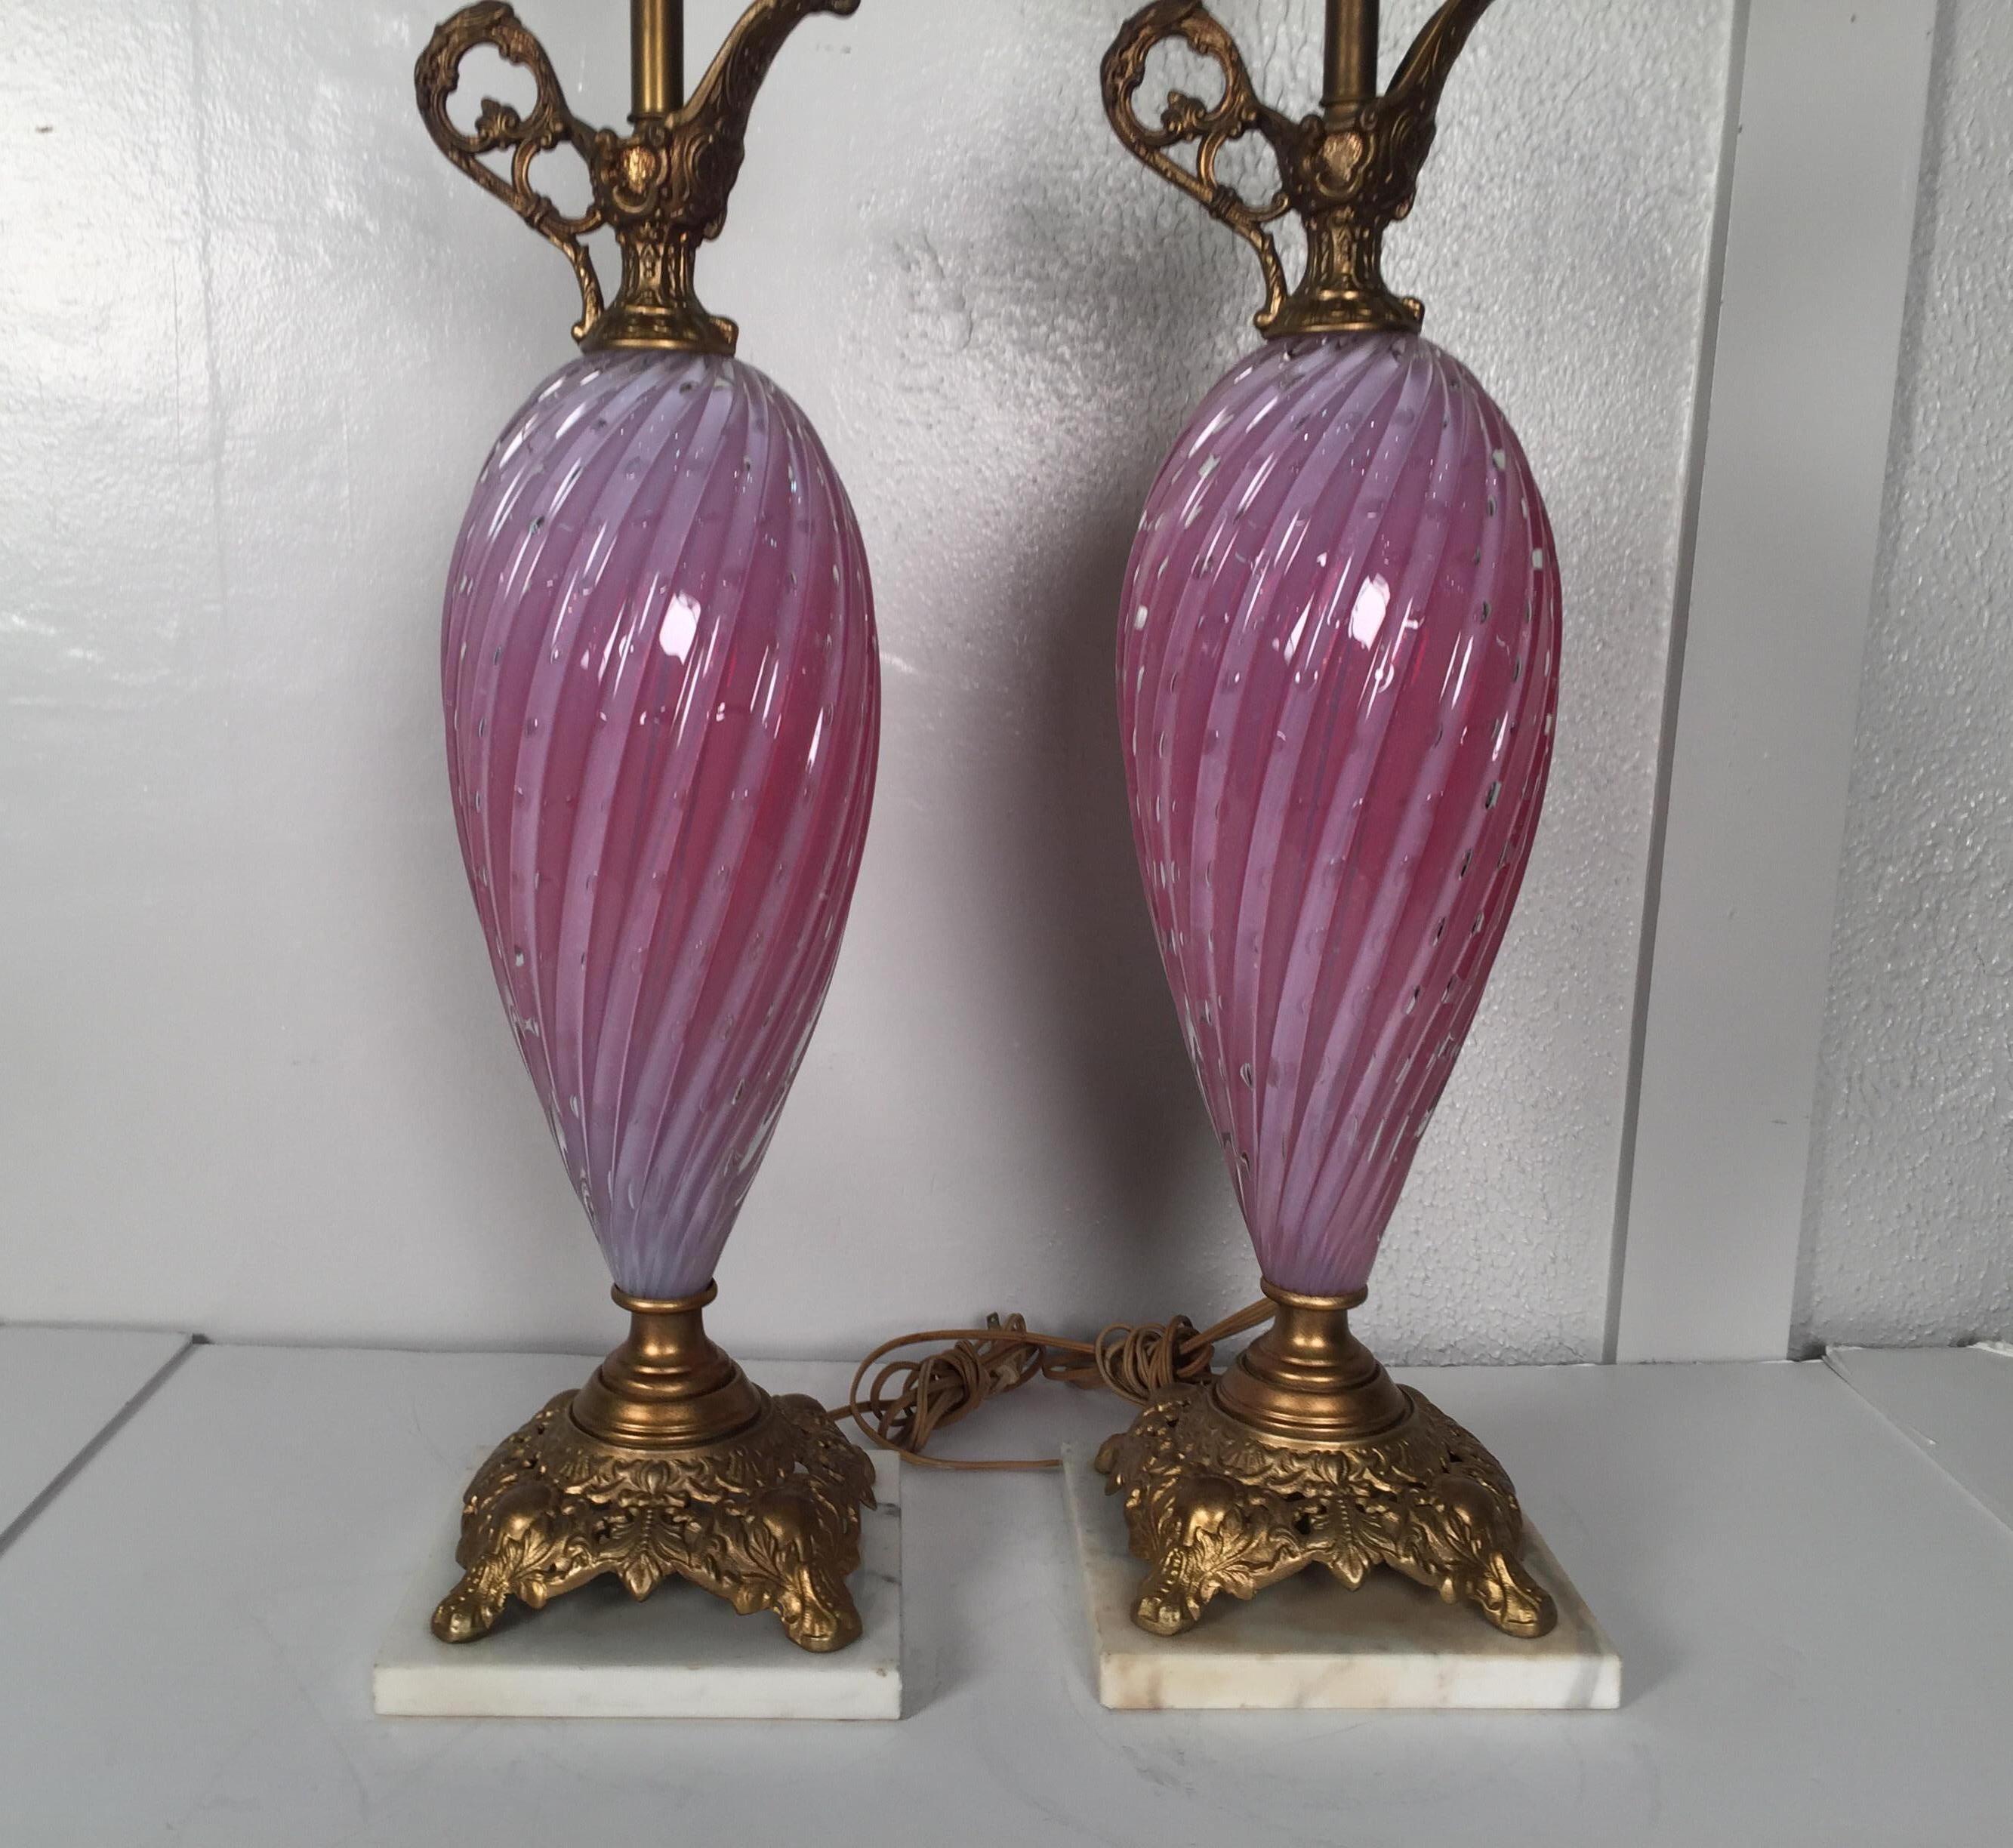 A pair of Rose and white Murano glass ewer form lamps. The glass bodies with gilt grass top and base. The height with an appropriate shade is 39 to the top of the finial. The base is 7.5 inches square. 29 inches to the top of the socket.